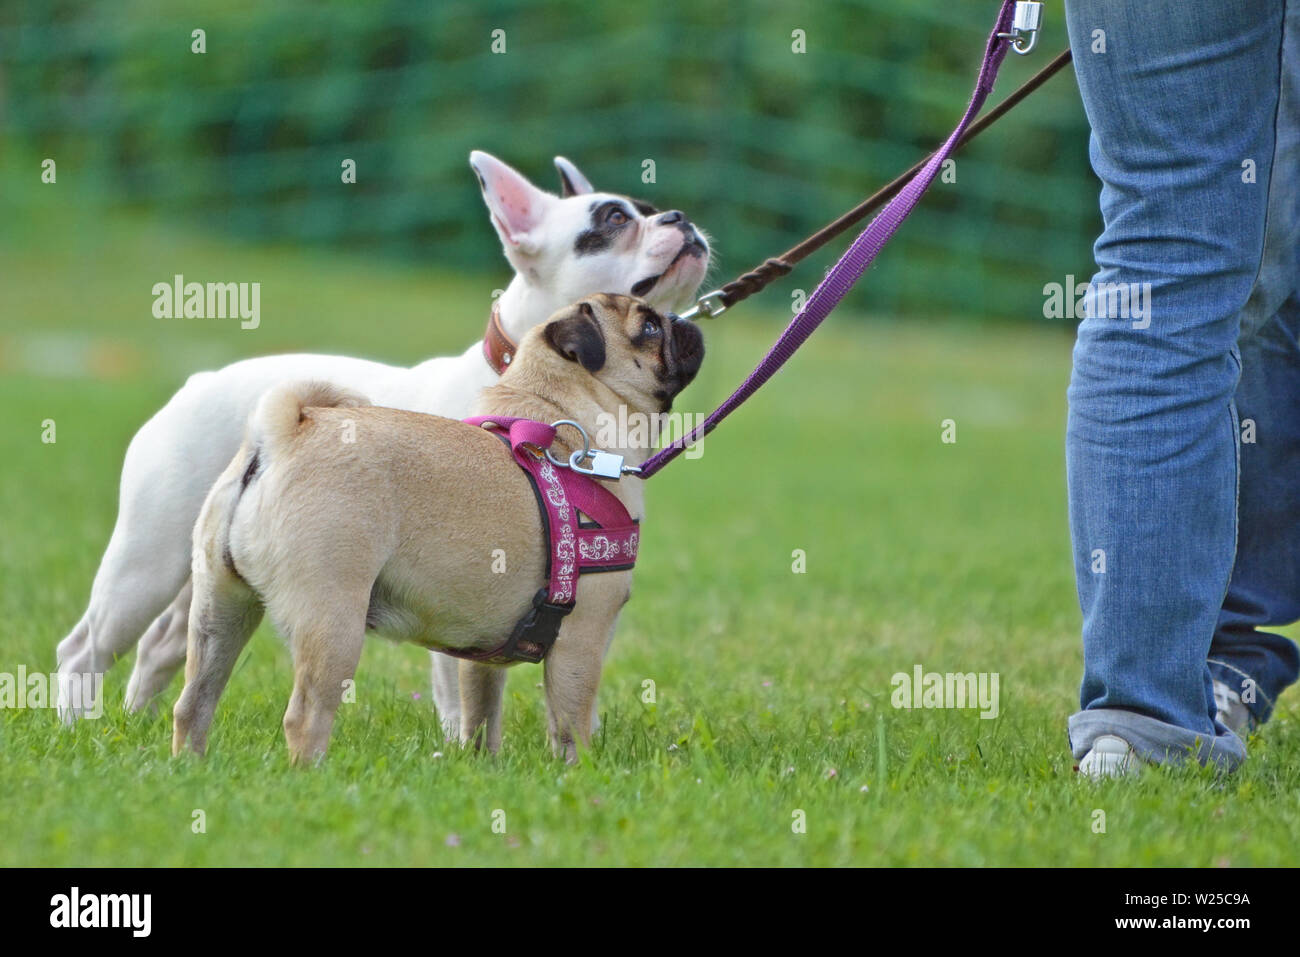 Short nosed fawn pug dog on leash with white french bulldog in background Stock Photo